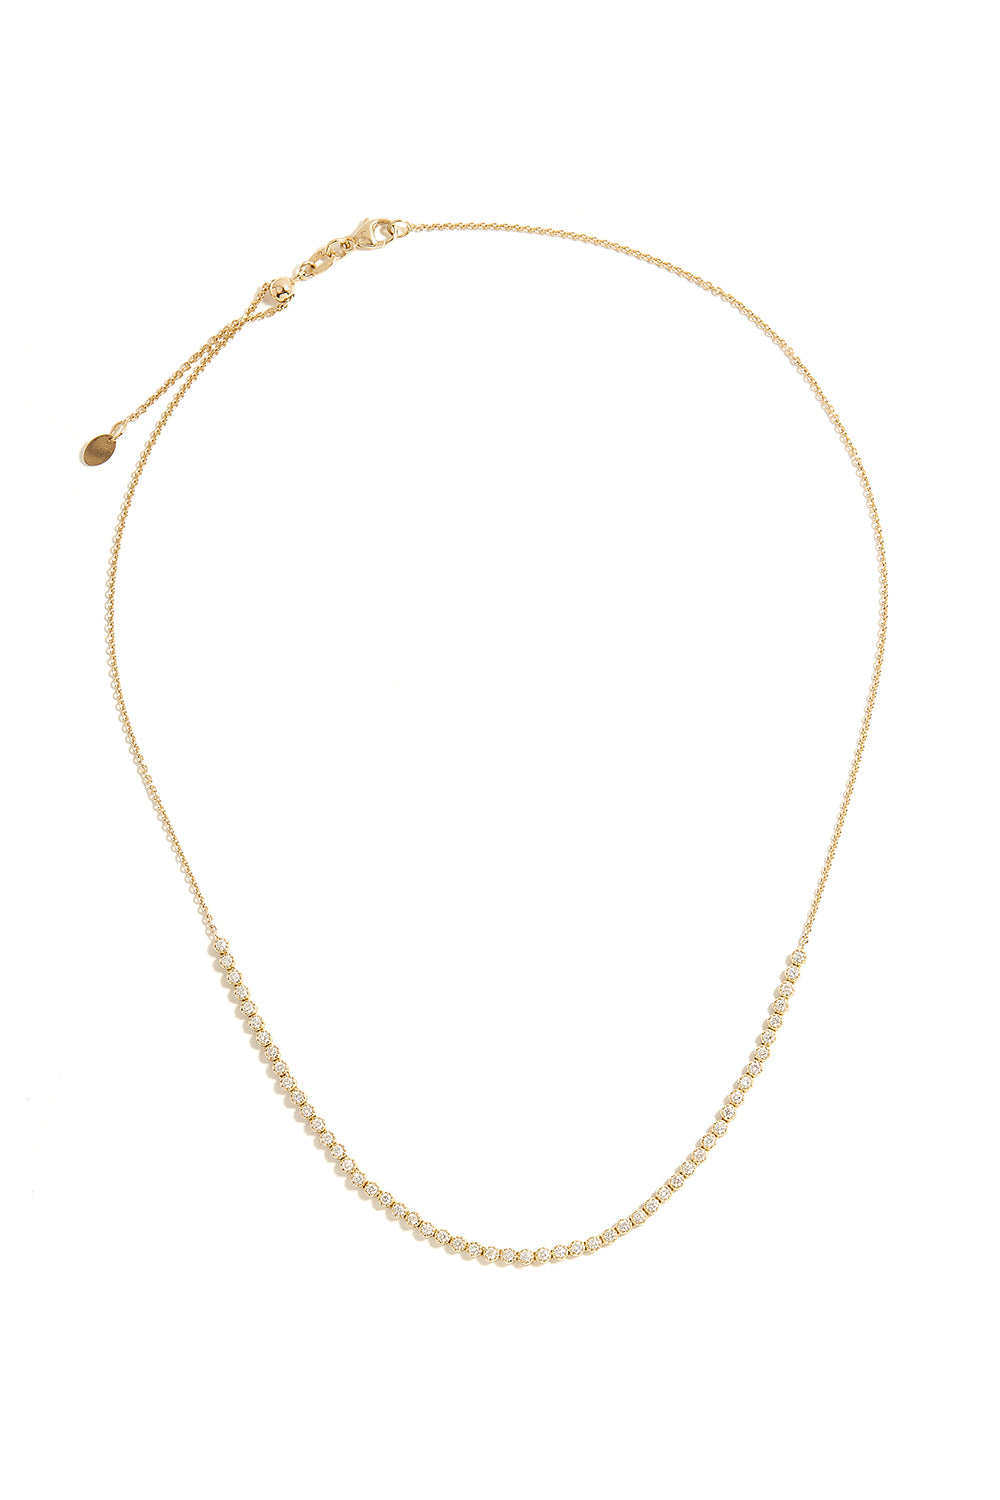 L.A. STEIN Small Diamond Tennis Necklace in Yellow Gold